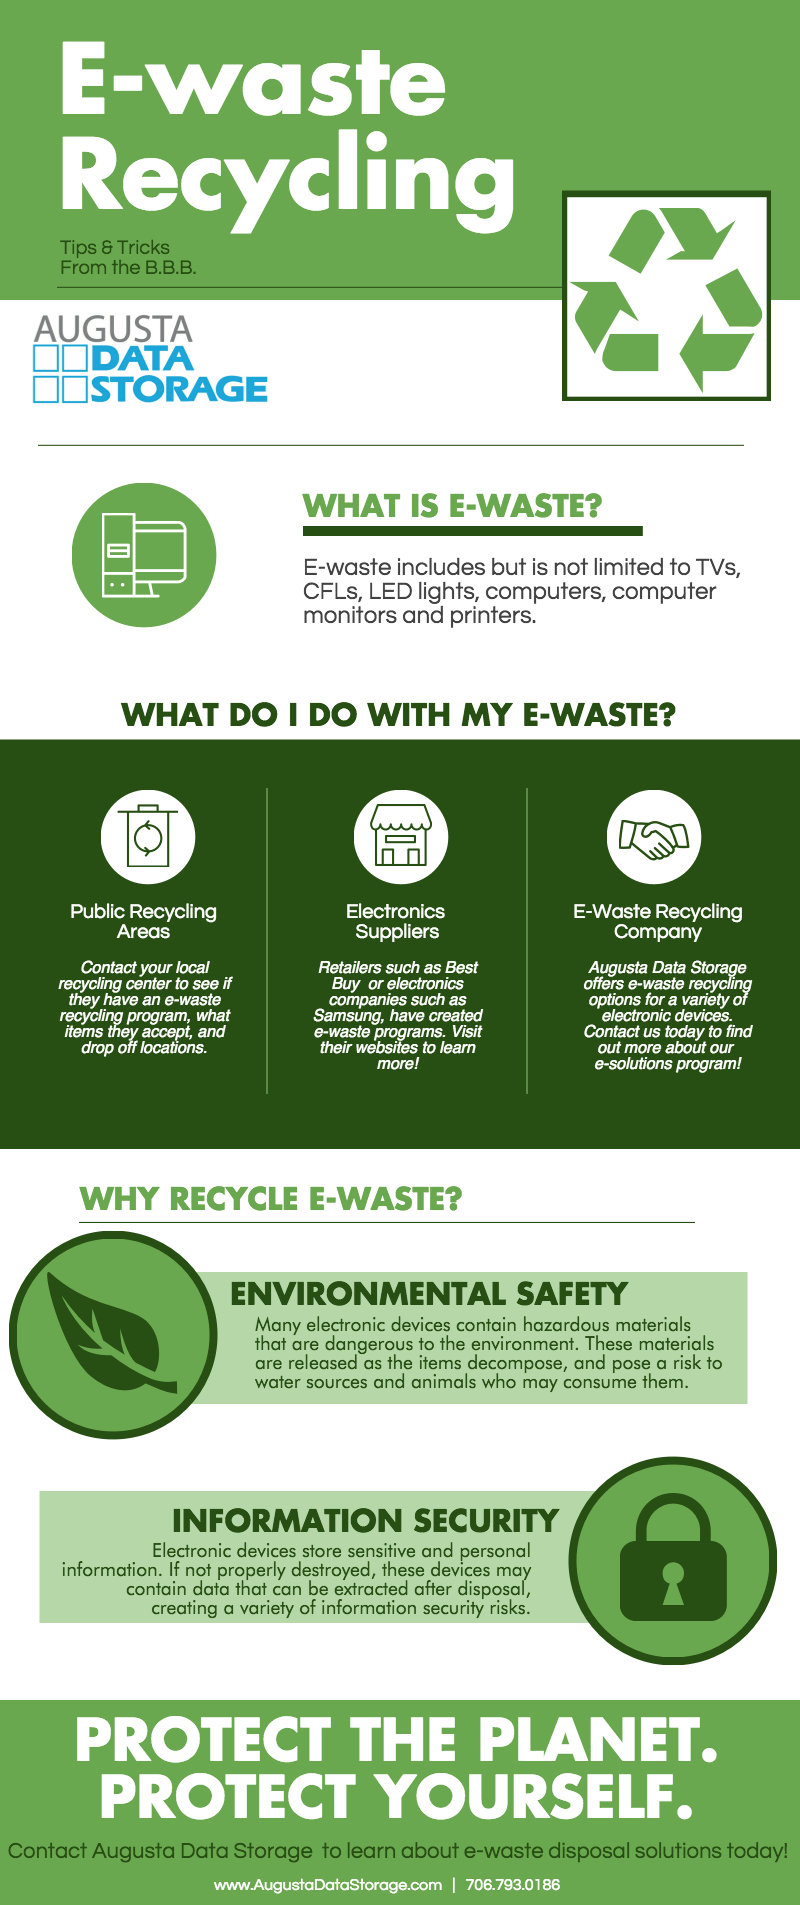 E-Waste Recycling Infographic